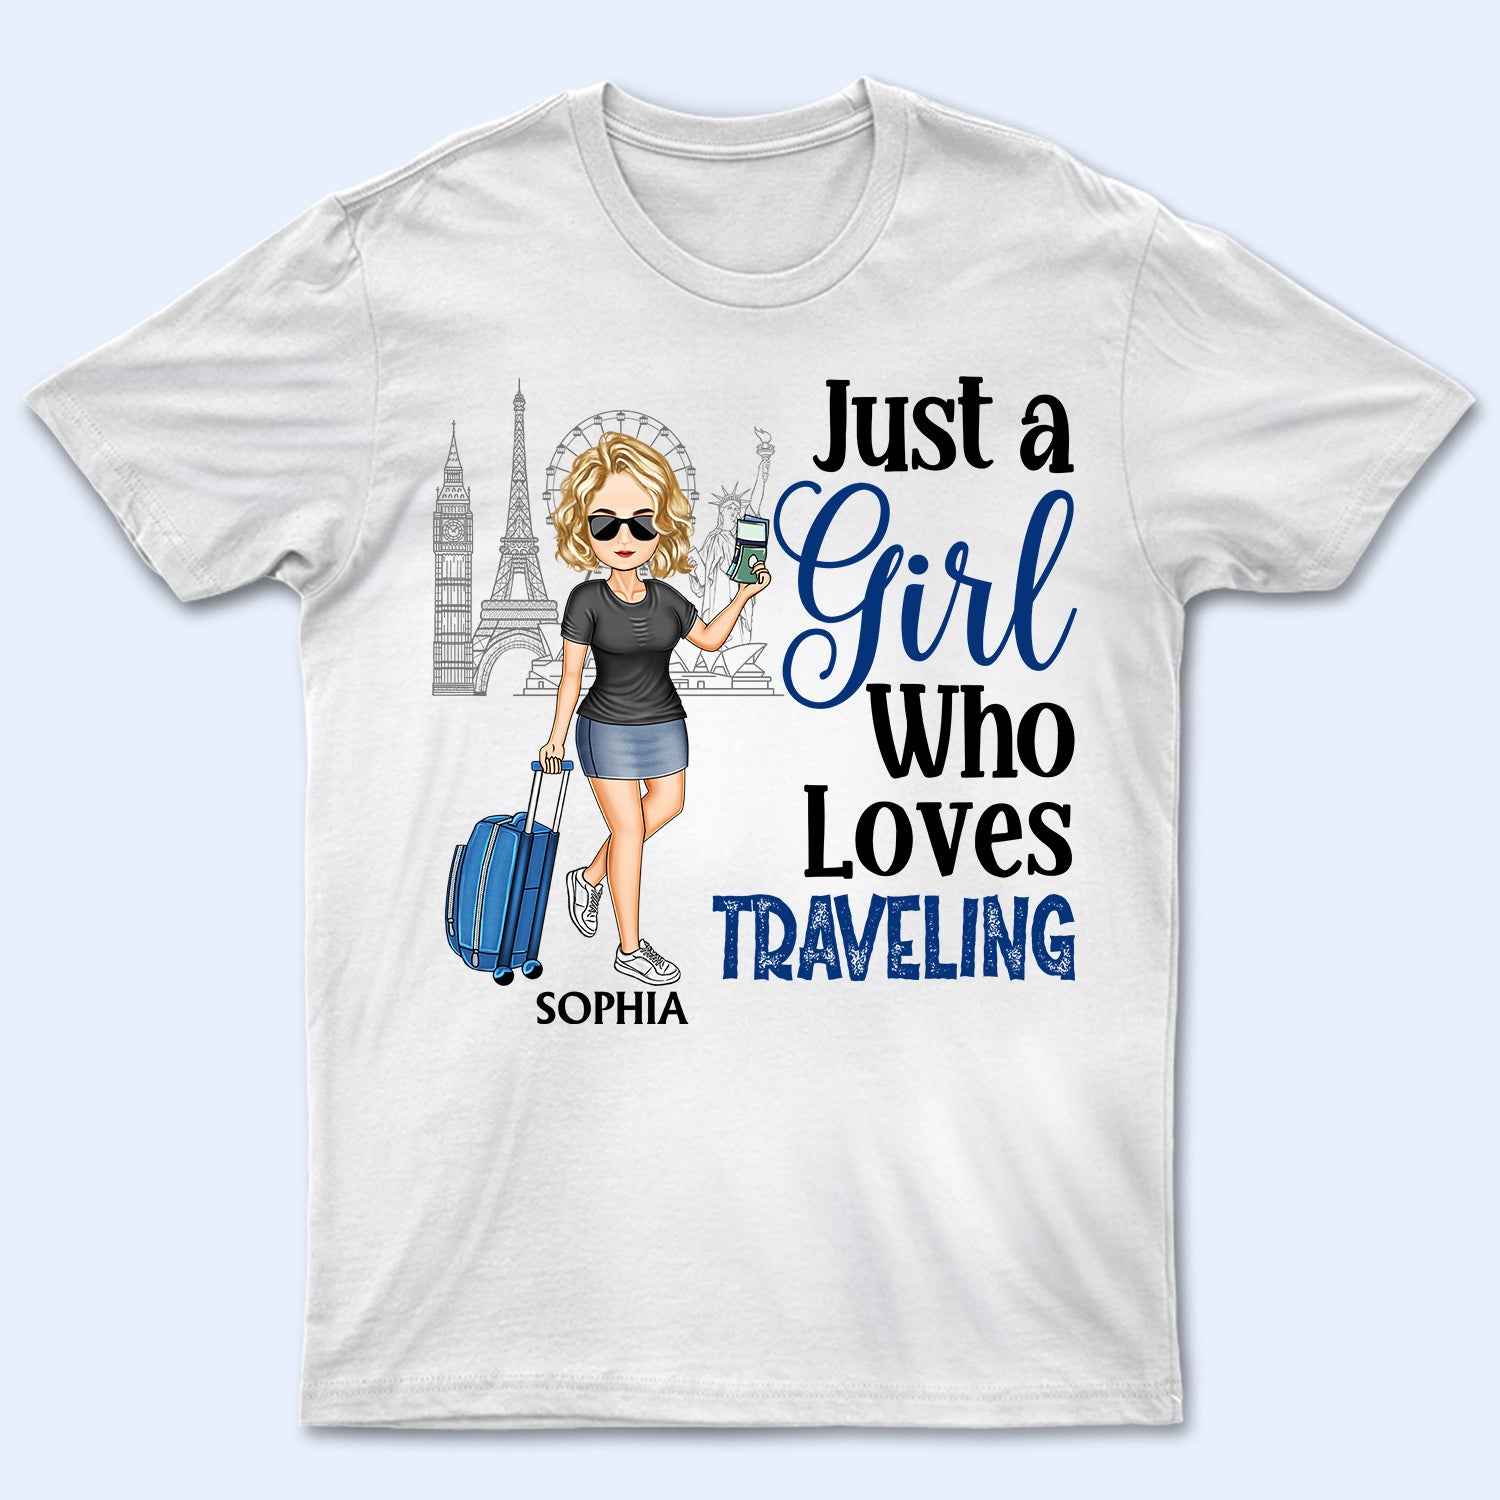 Just A Girl Boy Who Loves Traveling Cruising - Birthday Gift For Him, Her, Kid, Friends, Family, Trippin‘, Vacation Lovers - Personalized Custom T Shirt